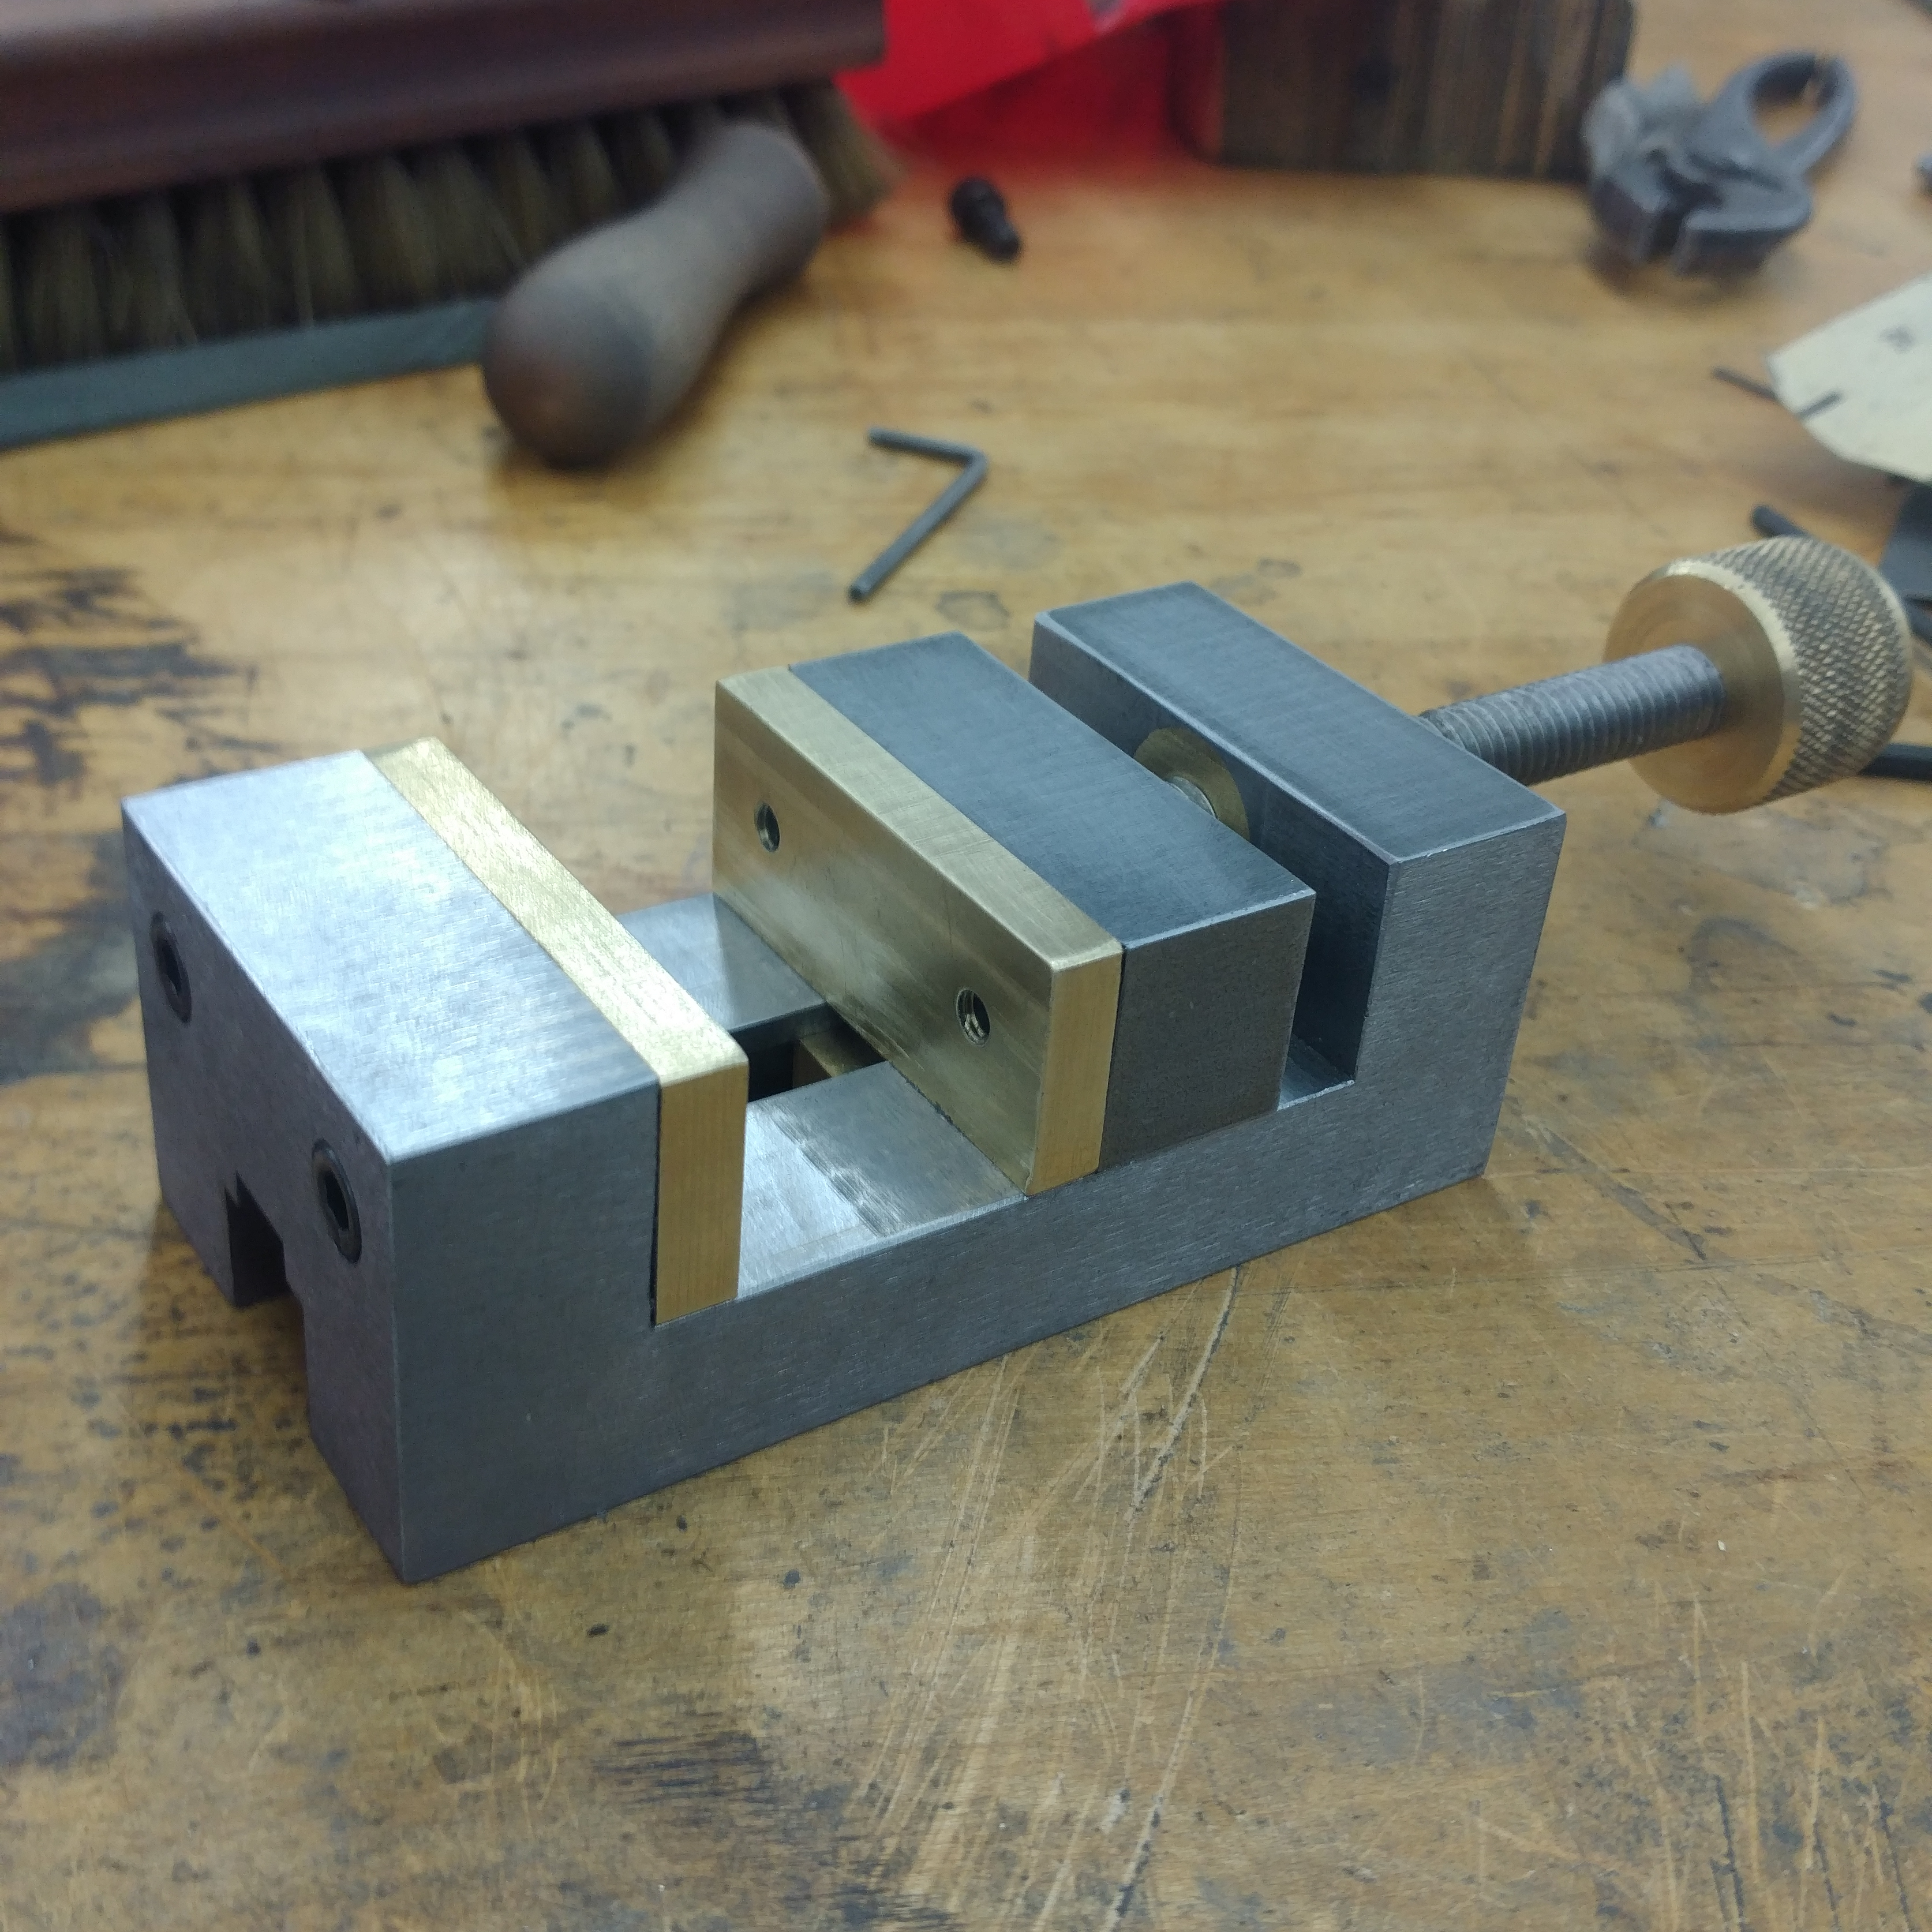 A metal vice from the other angle